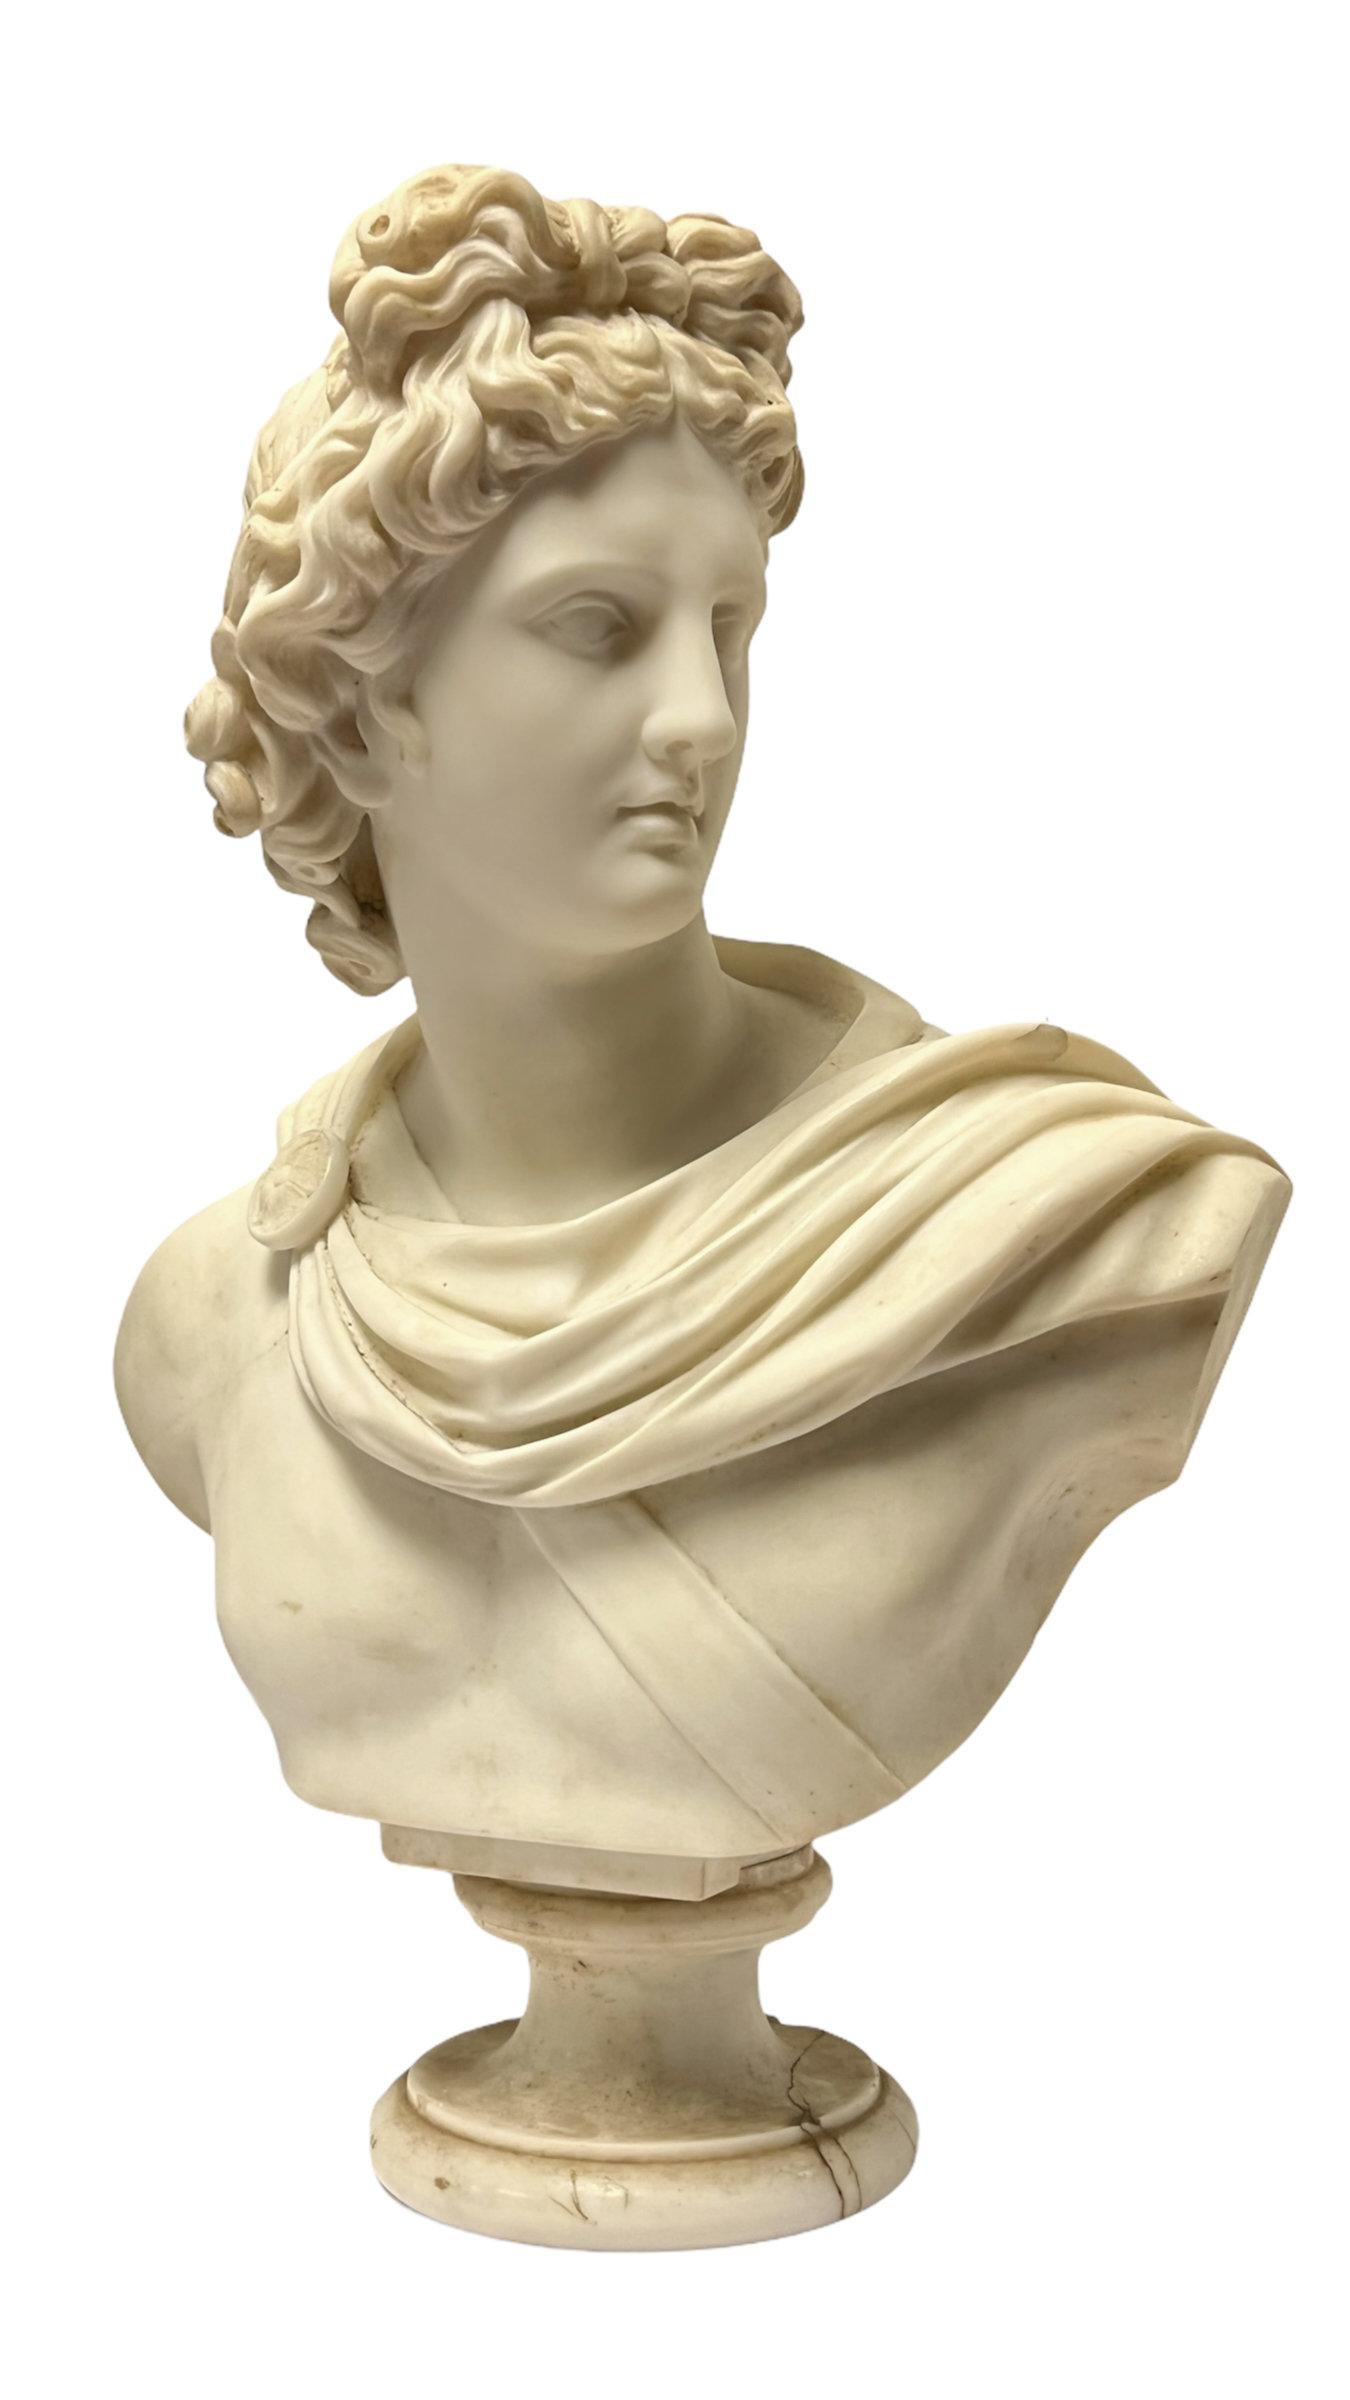 Very finely carved Italian 19 century marble bust of Apollo.
Signed on the back: 